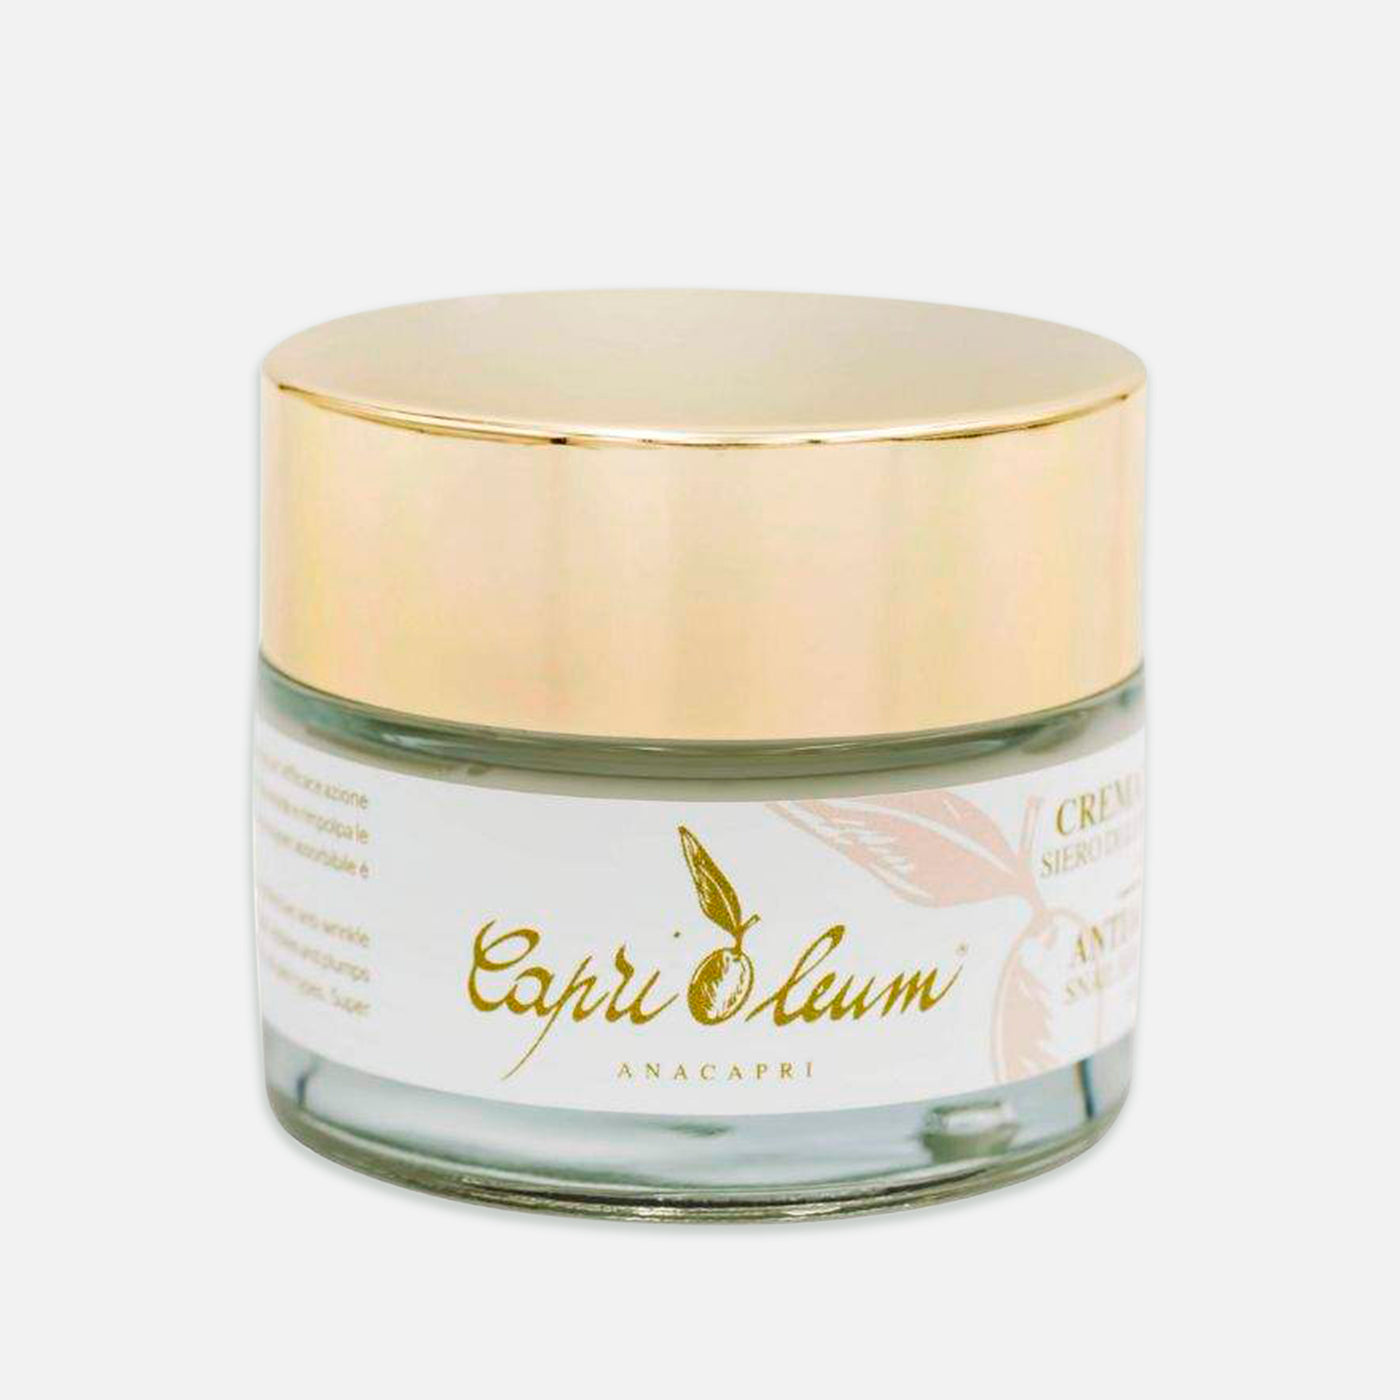 Anti Age Face Cream with Extra virgin olive oil from Capri